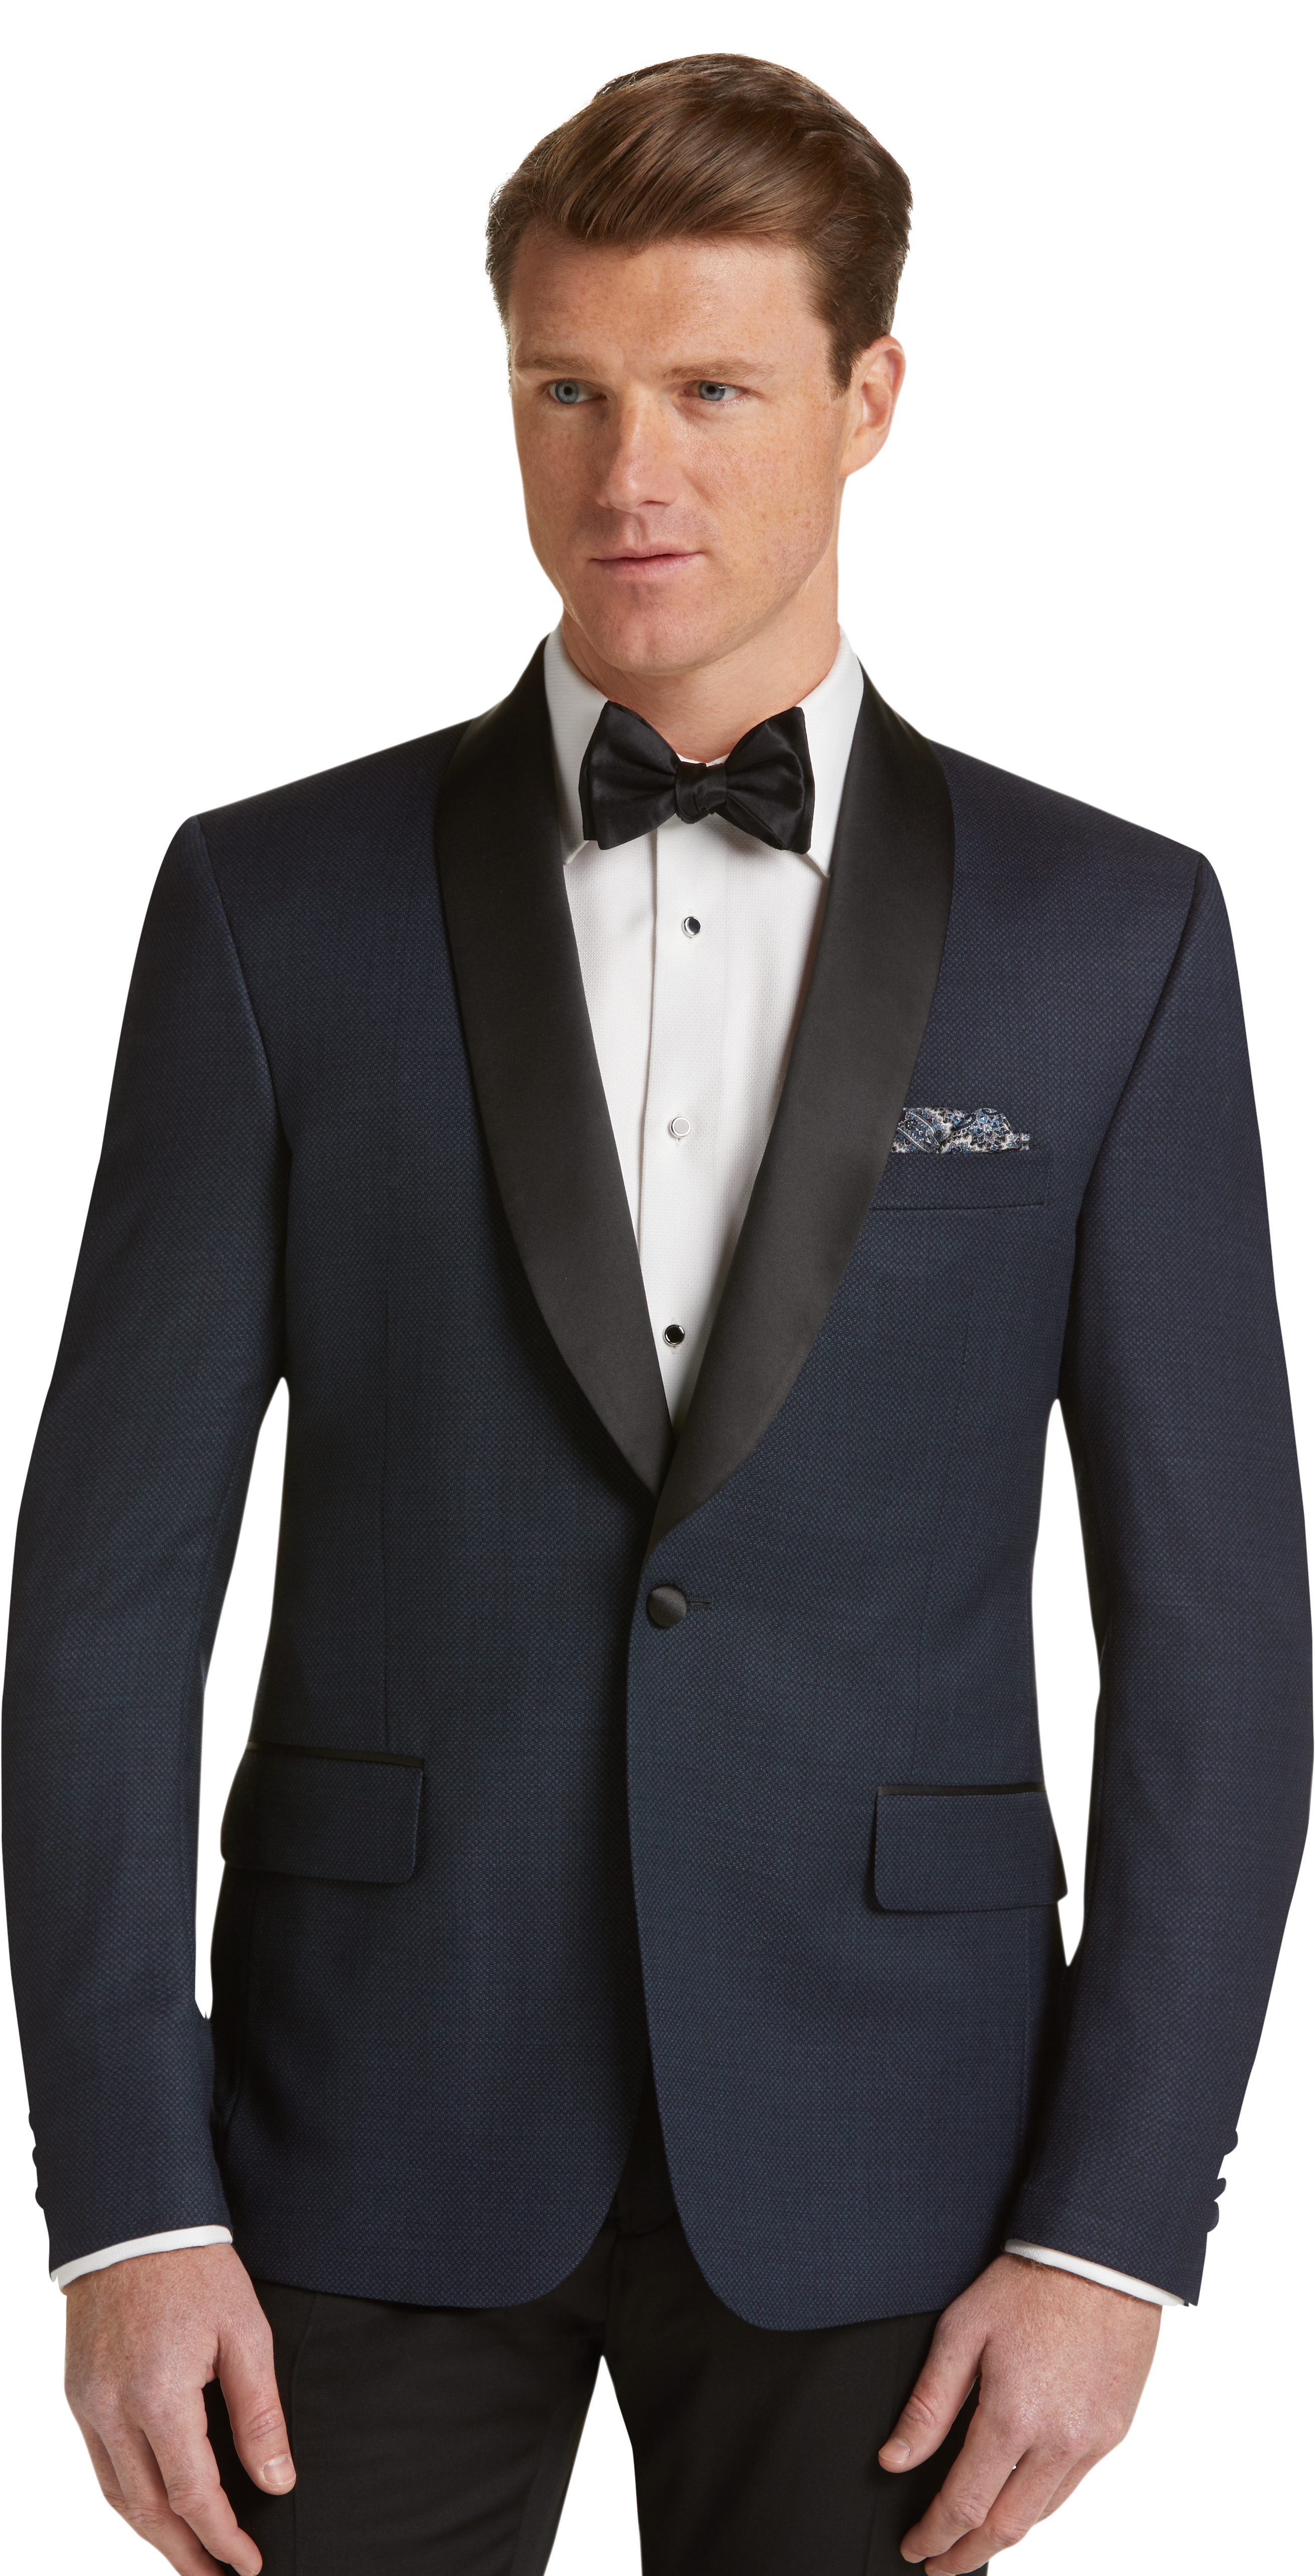 Jos. A. Bank Slim Fit Woven Mini Check Tuxedo Jacket CLEARANCE - All Clearance | Jos A Bank